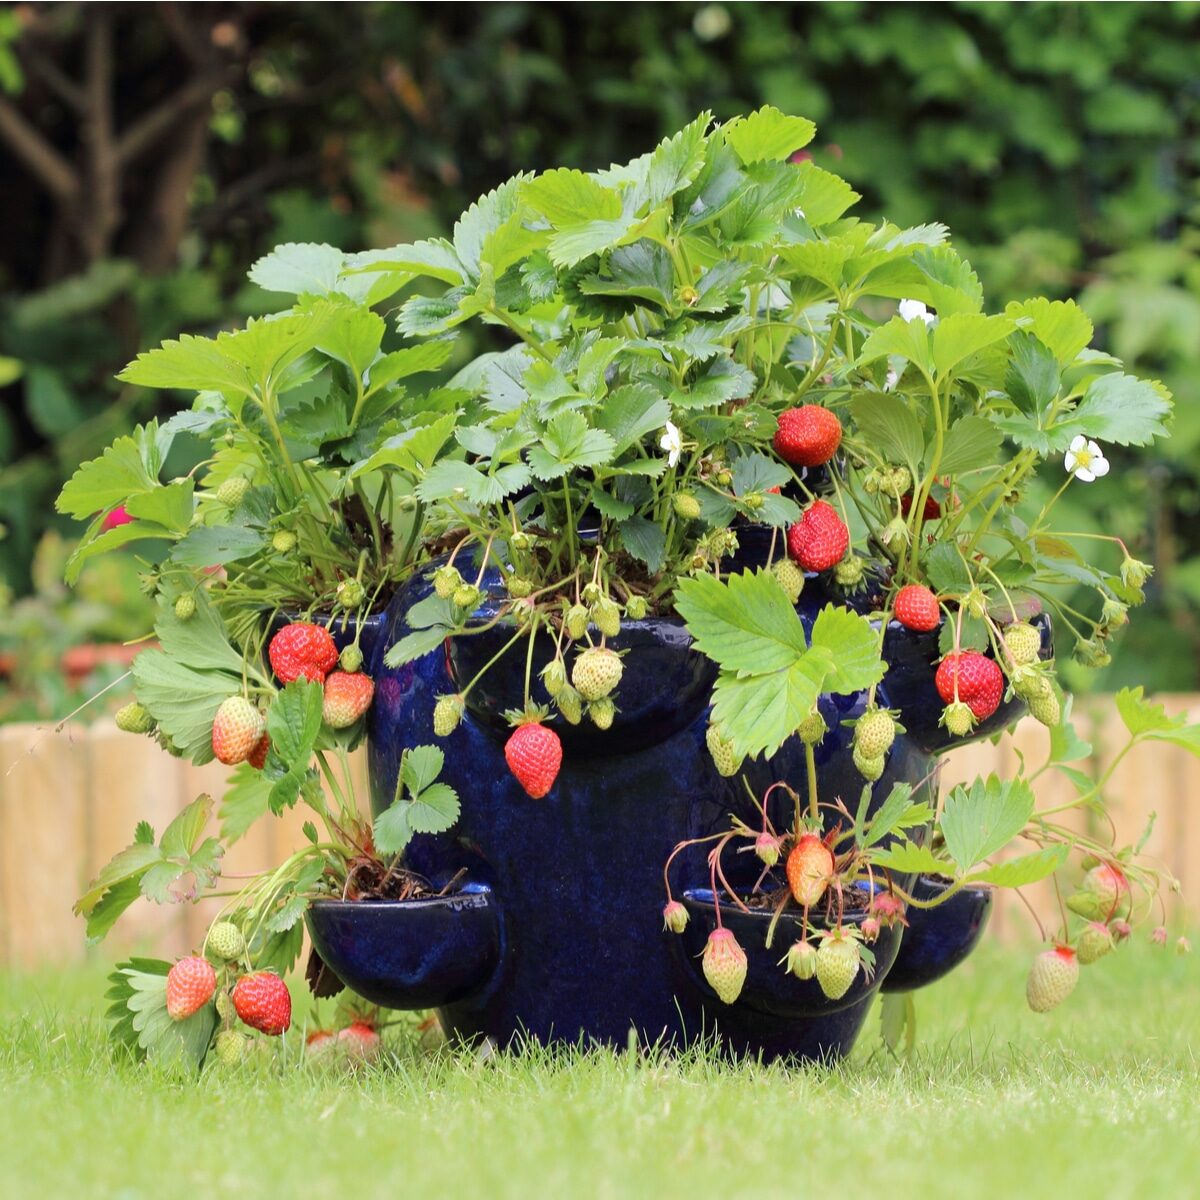 How to plant strawberry? Care in planting